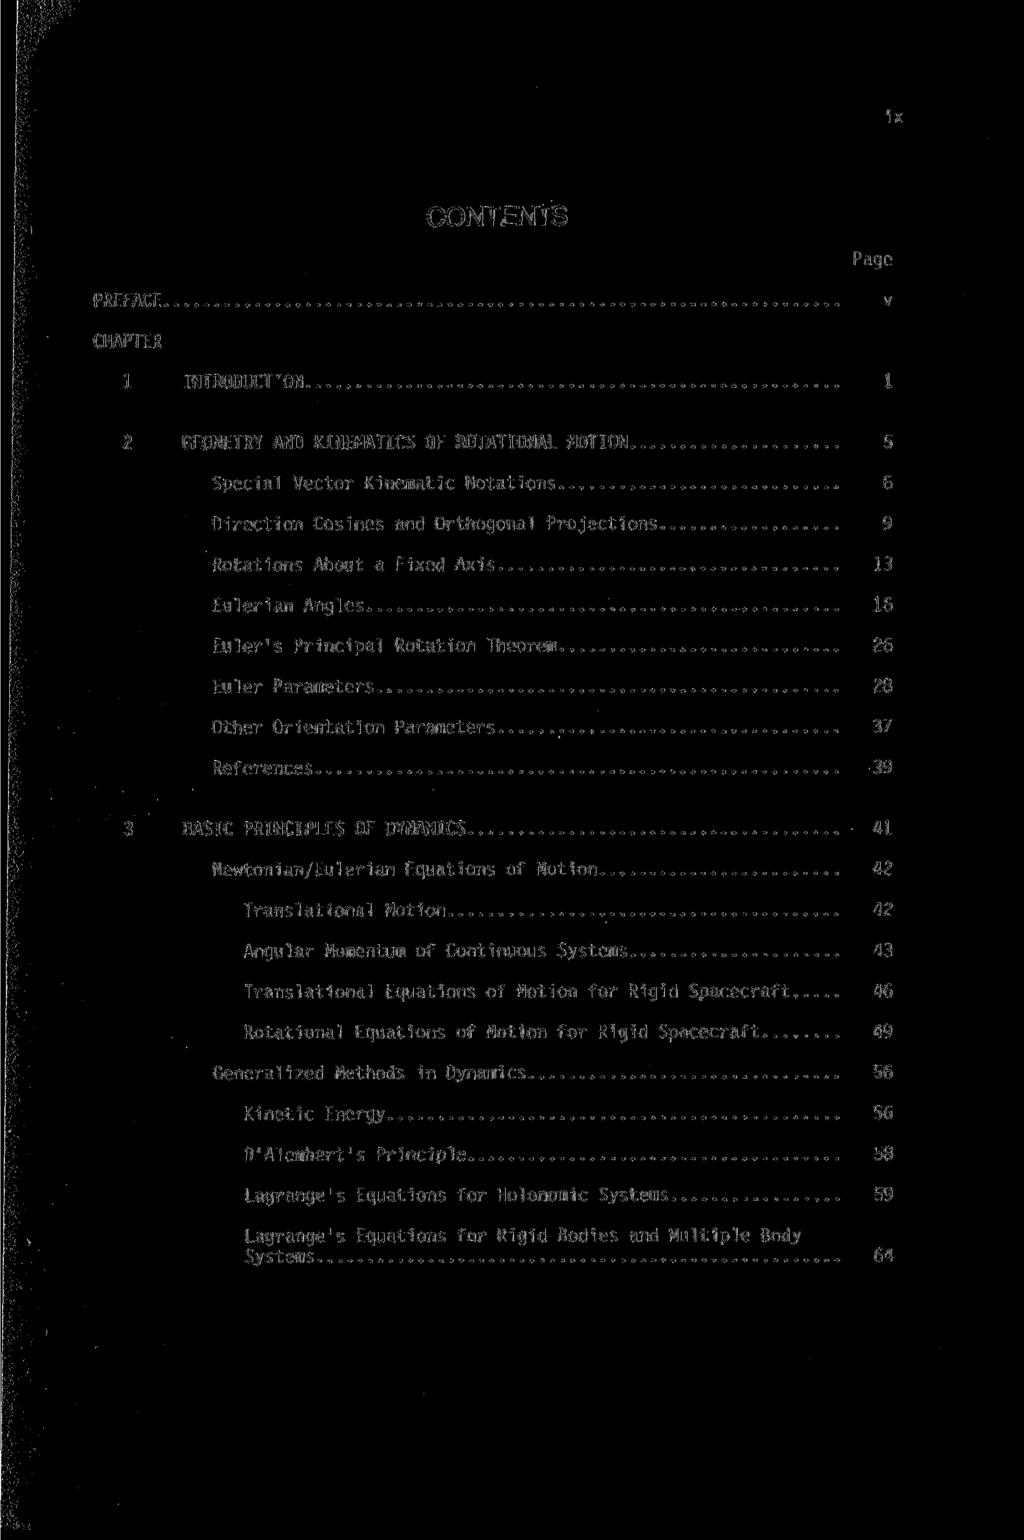 ix CONTENTS Page PREFACE v CHAPTER 1 INTRODUCTION 1 2 GEOMETRY AND KINEMATICS OF ROTATIONAL MOTION 5 Special Vector Kinematic Notations 6 Direction Cosines and Orthogonal Projections 9 Rotations